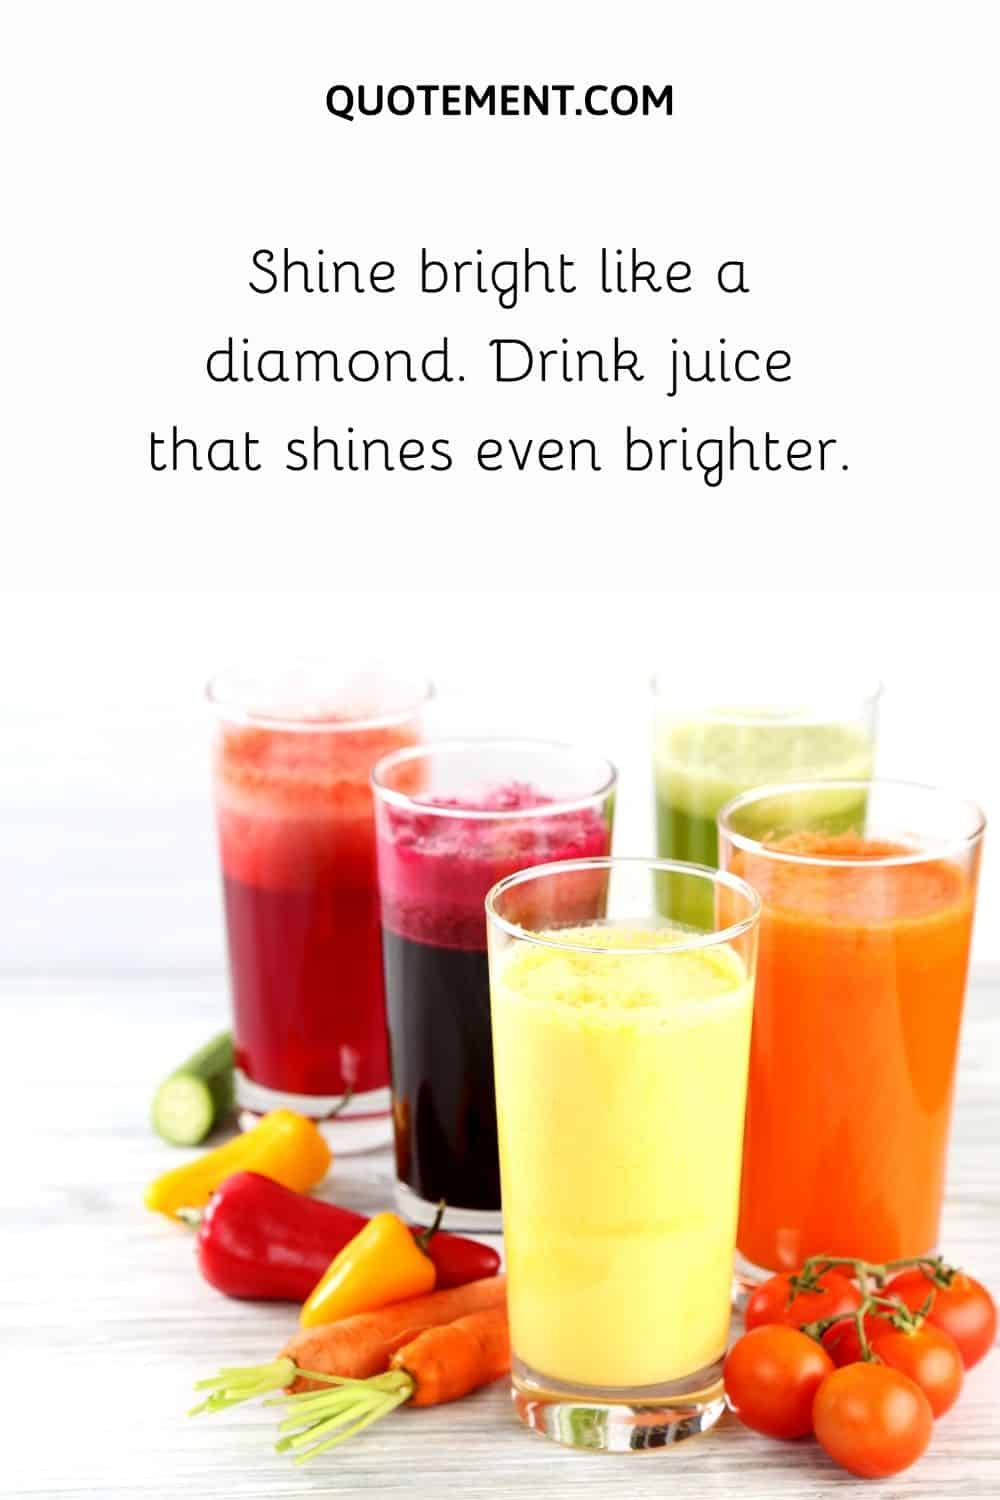 Shine bright like a diamond. Drink juice that shines even brighter